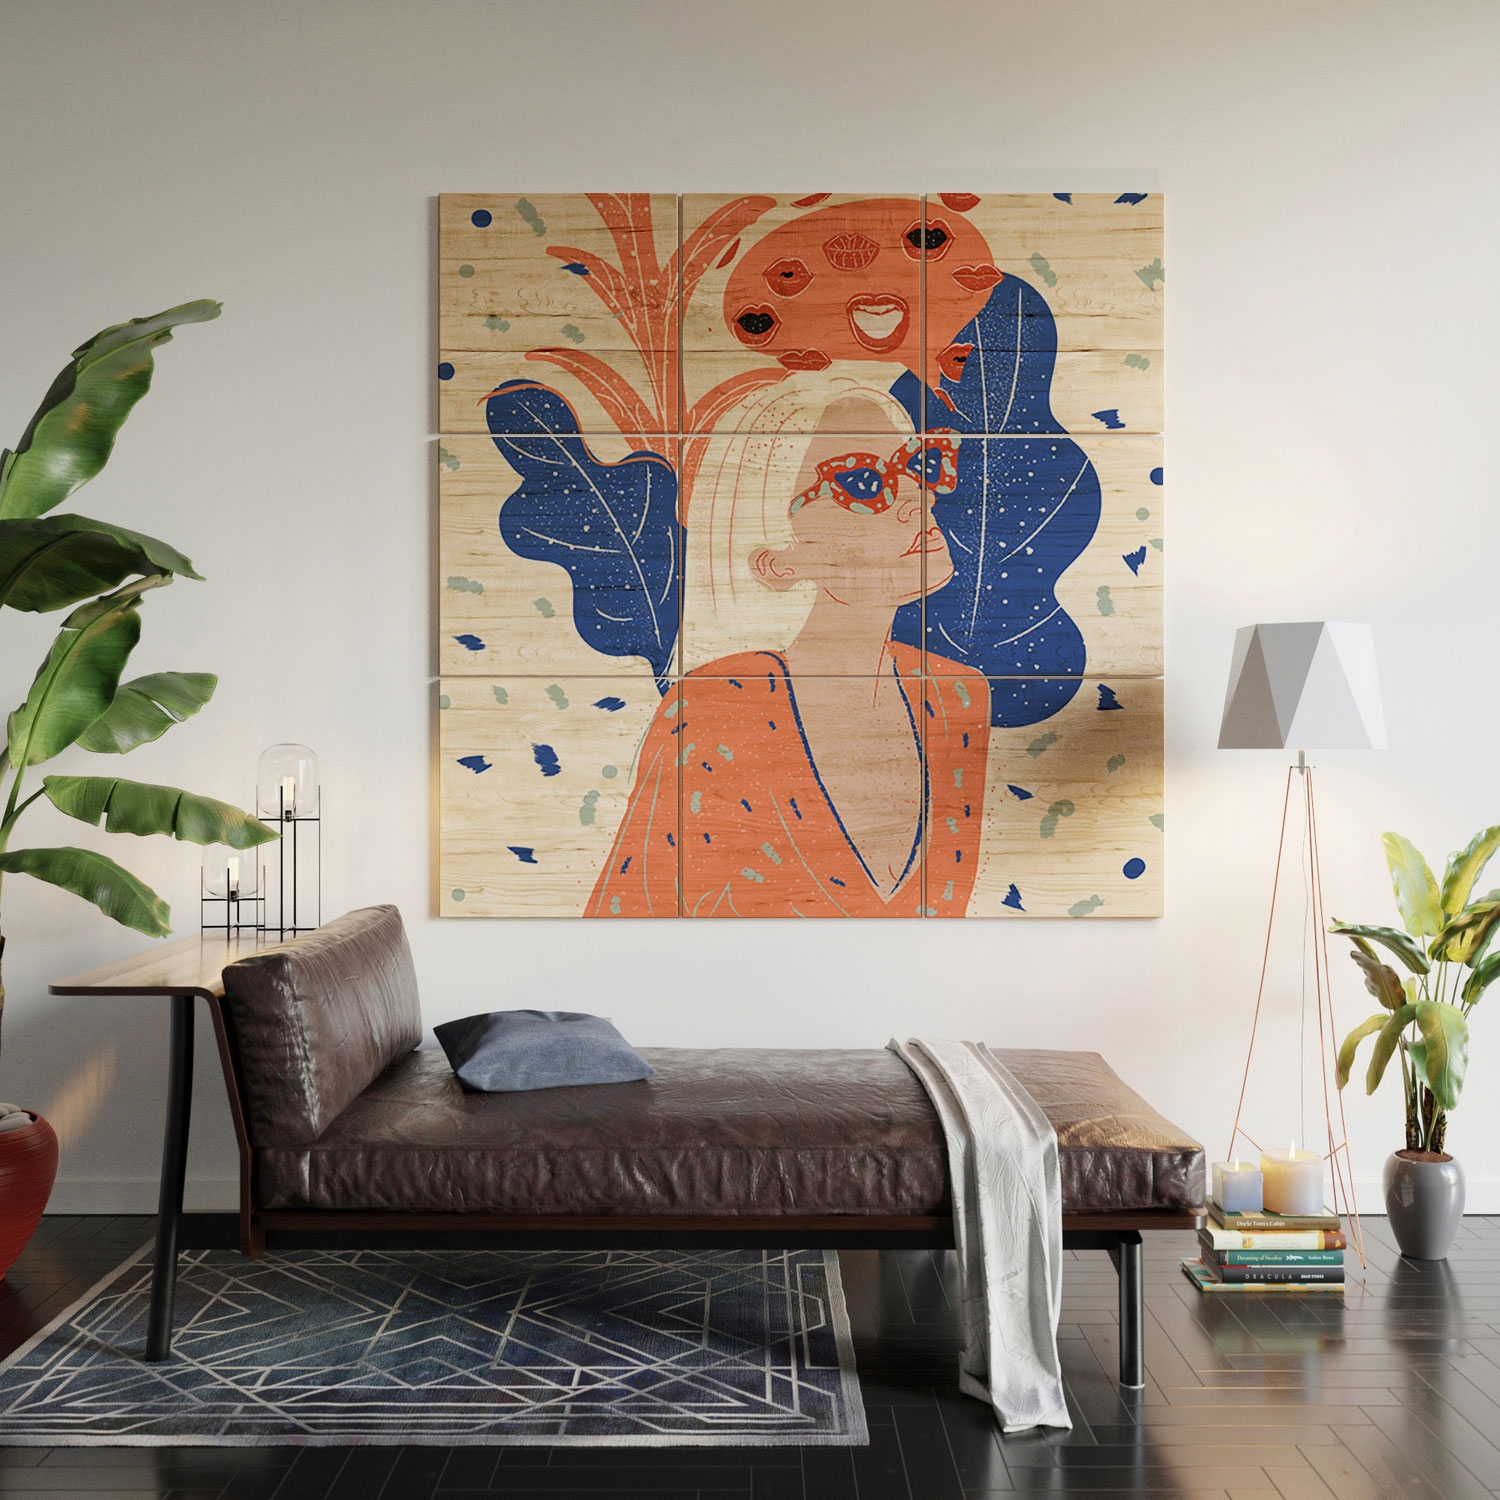 Thinkin About Kissin You by Alja Horvat - Wood Wall Mural5' x 5' (Nine 20" wood Squares) - Image 4